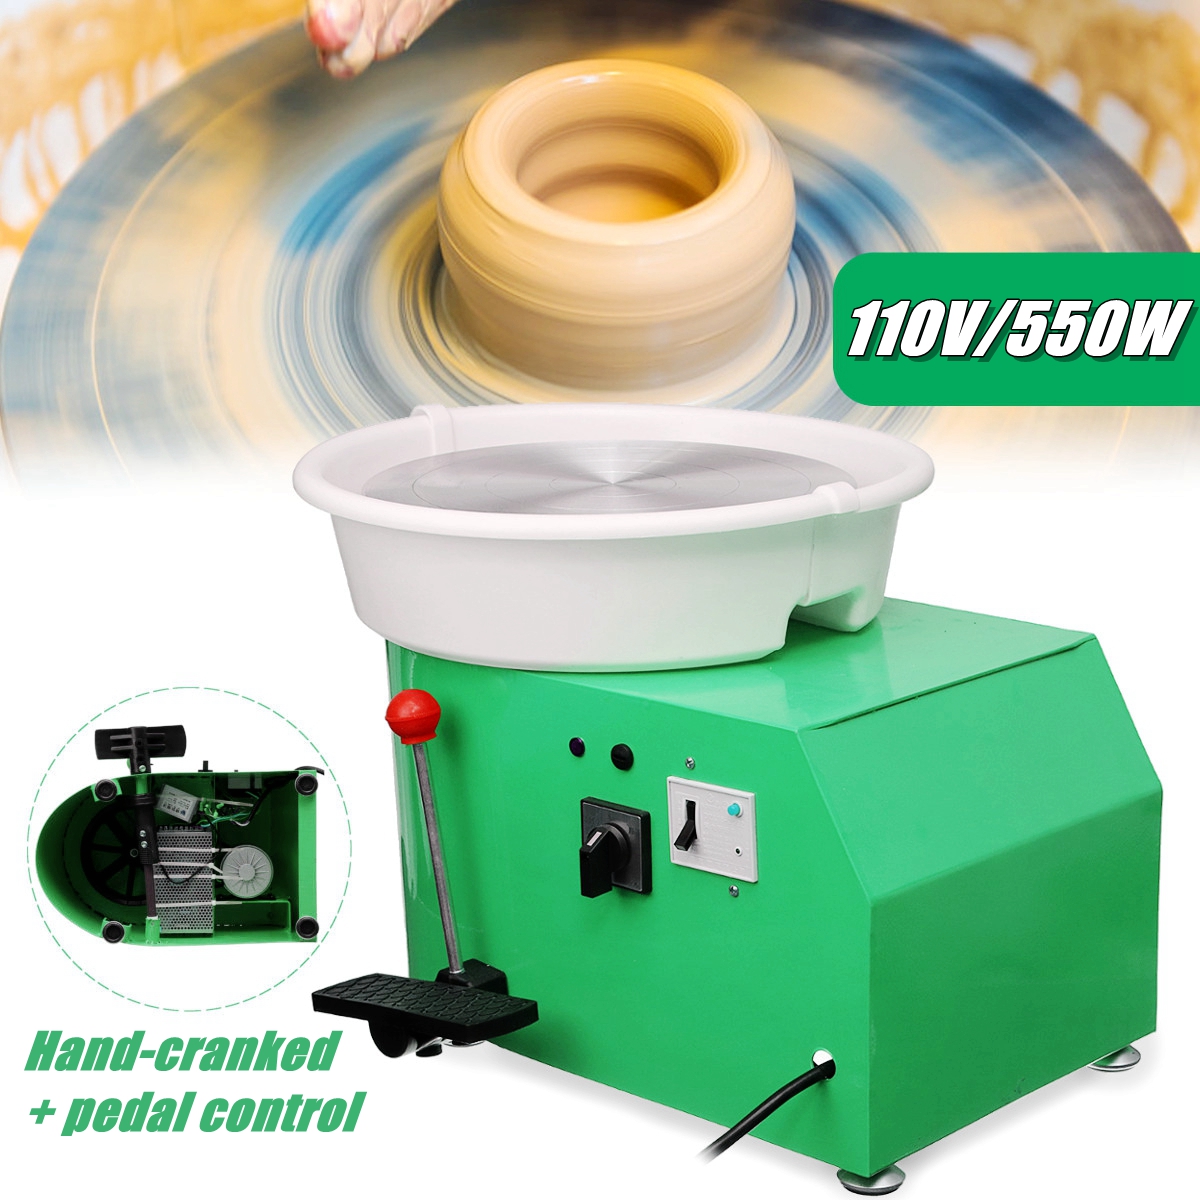 2-in-1-110V-550W-32CM-Electric-Pottery-Wheel-Machine-For-Ceramic-Work-Clay-Art-Craft-1407062-4